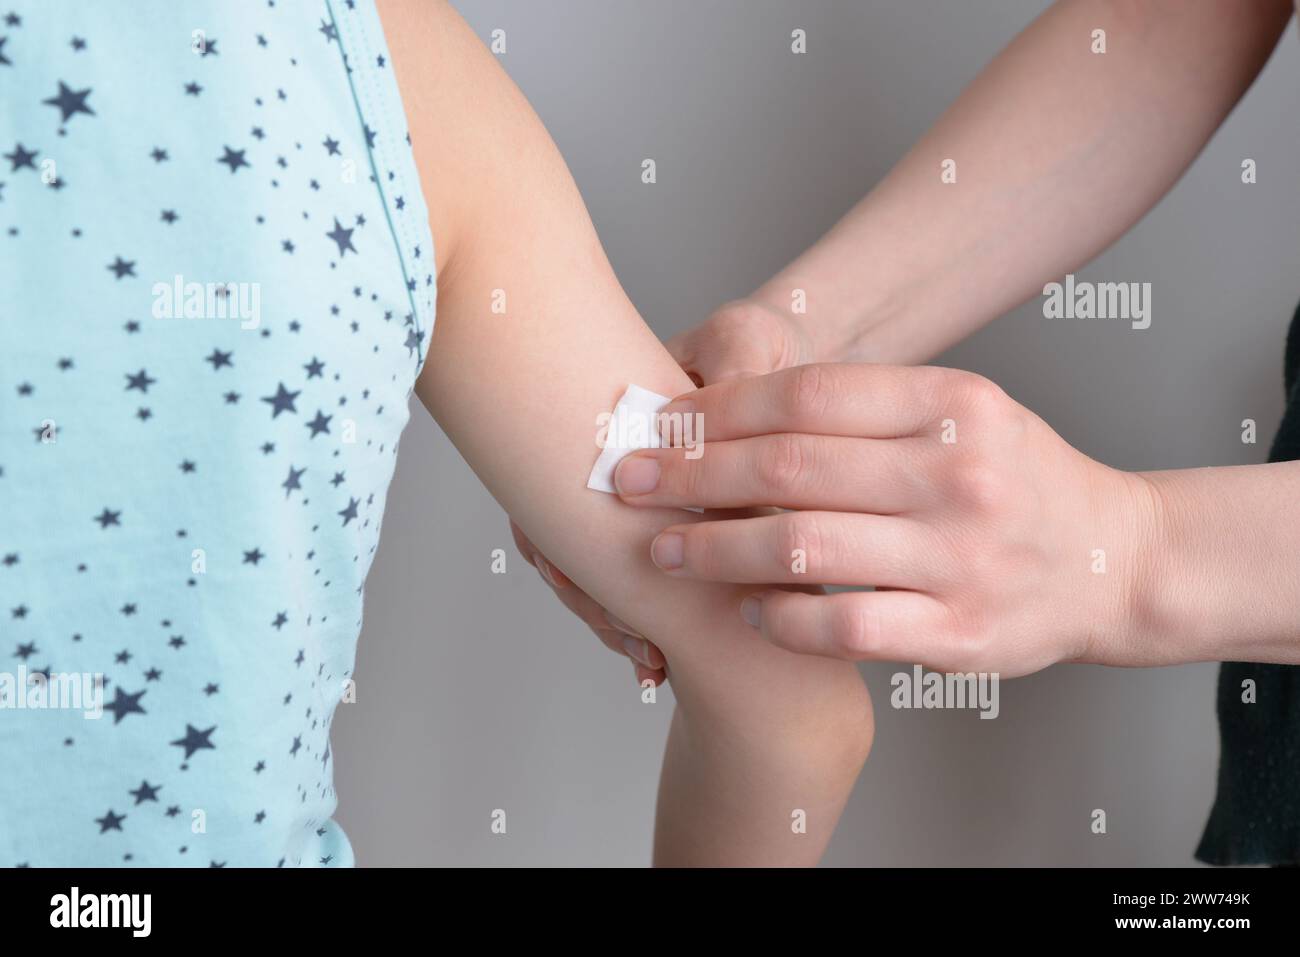 Hand disinfection with alcohol wipe. Preparation for vaccine, insulin injection, or sensor placement. Medical, healthcare, or hygiene concept Stock Photo